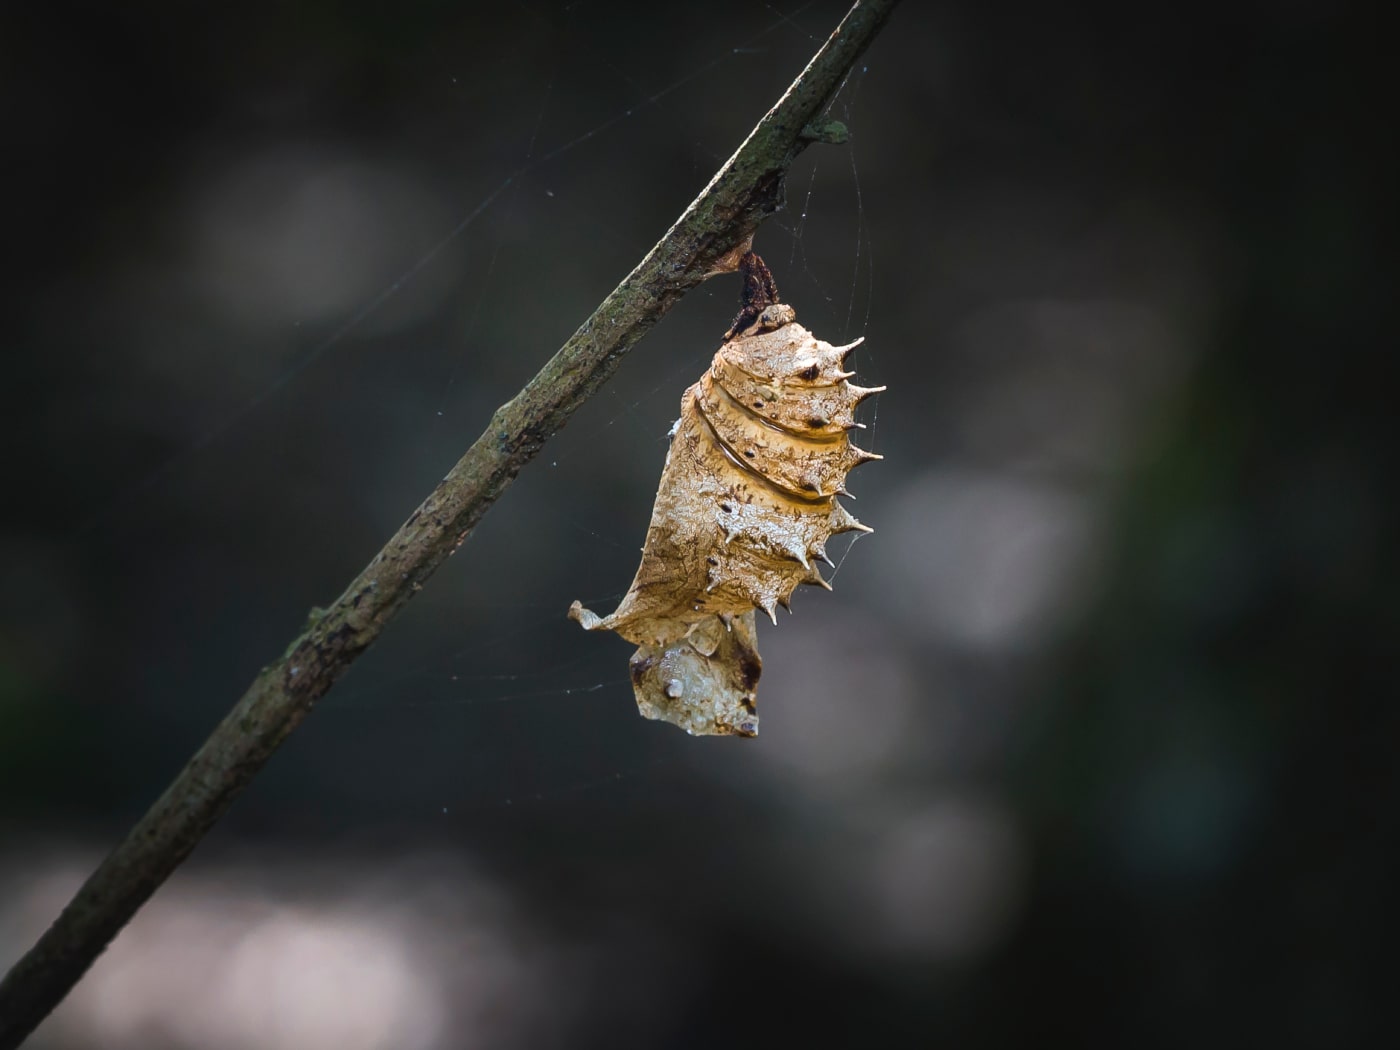 Butterfly Cocoon of silk unhatched hanging on a branch